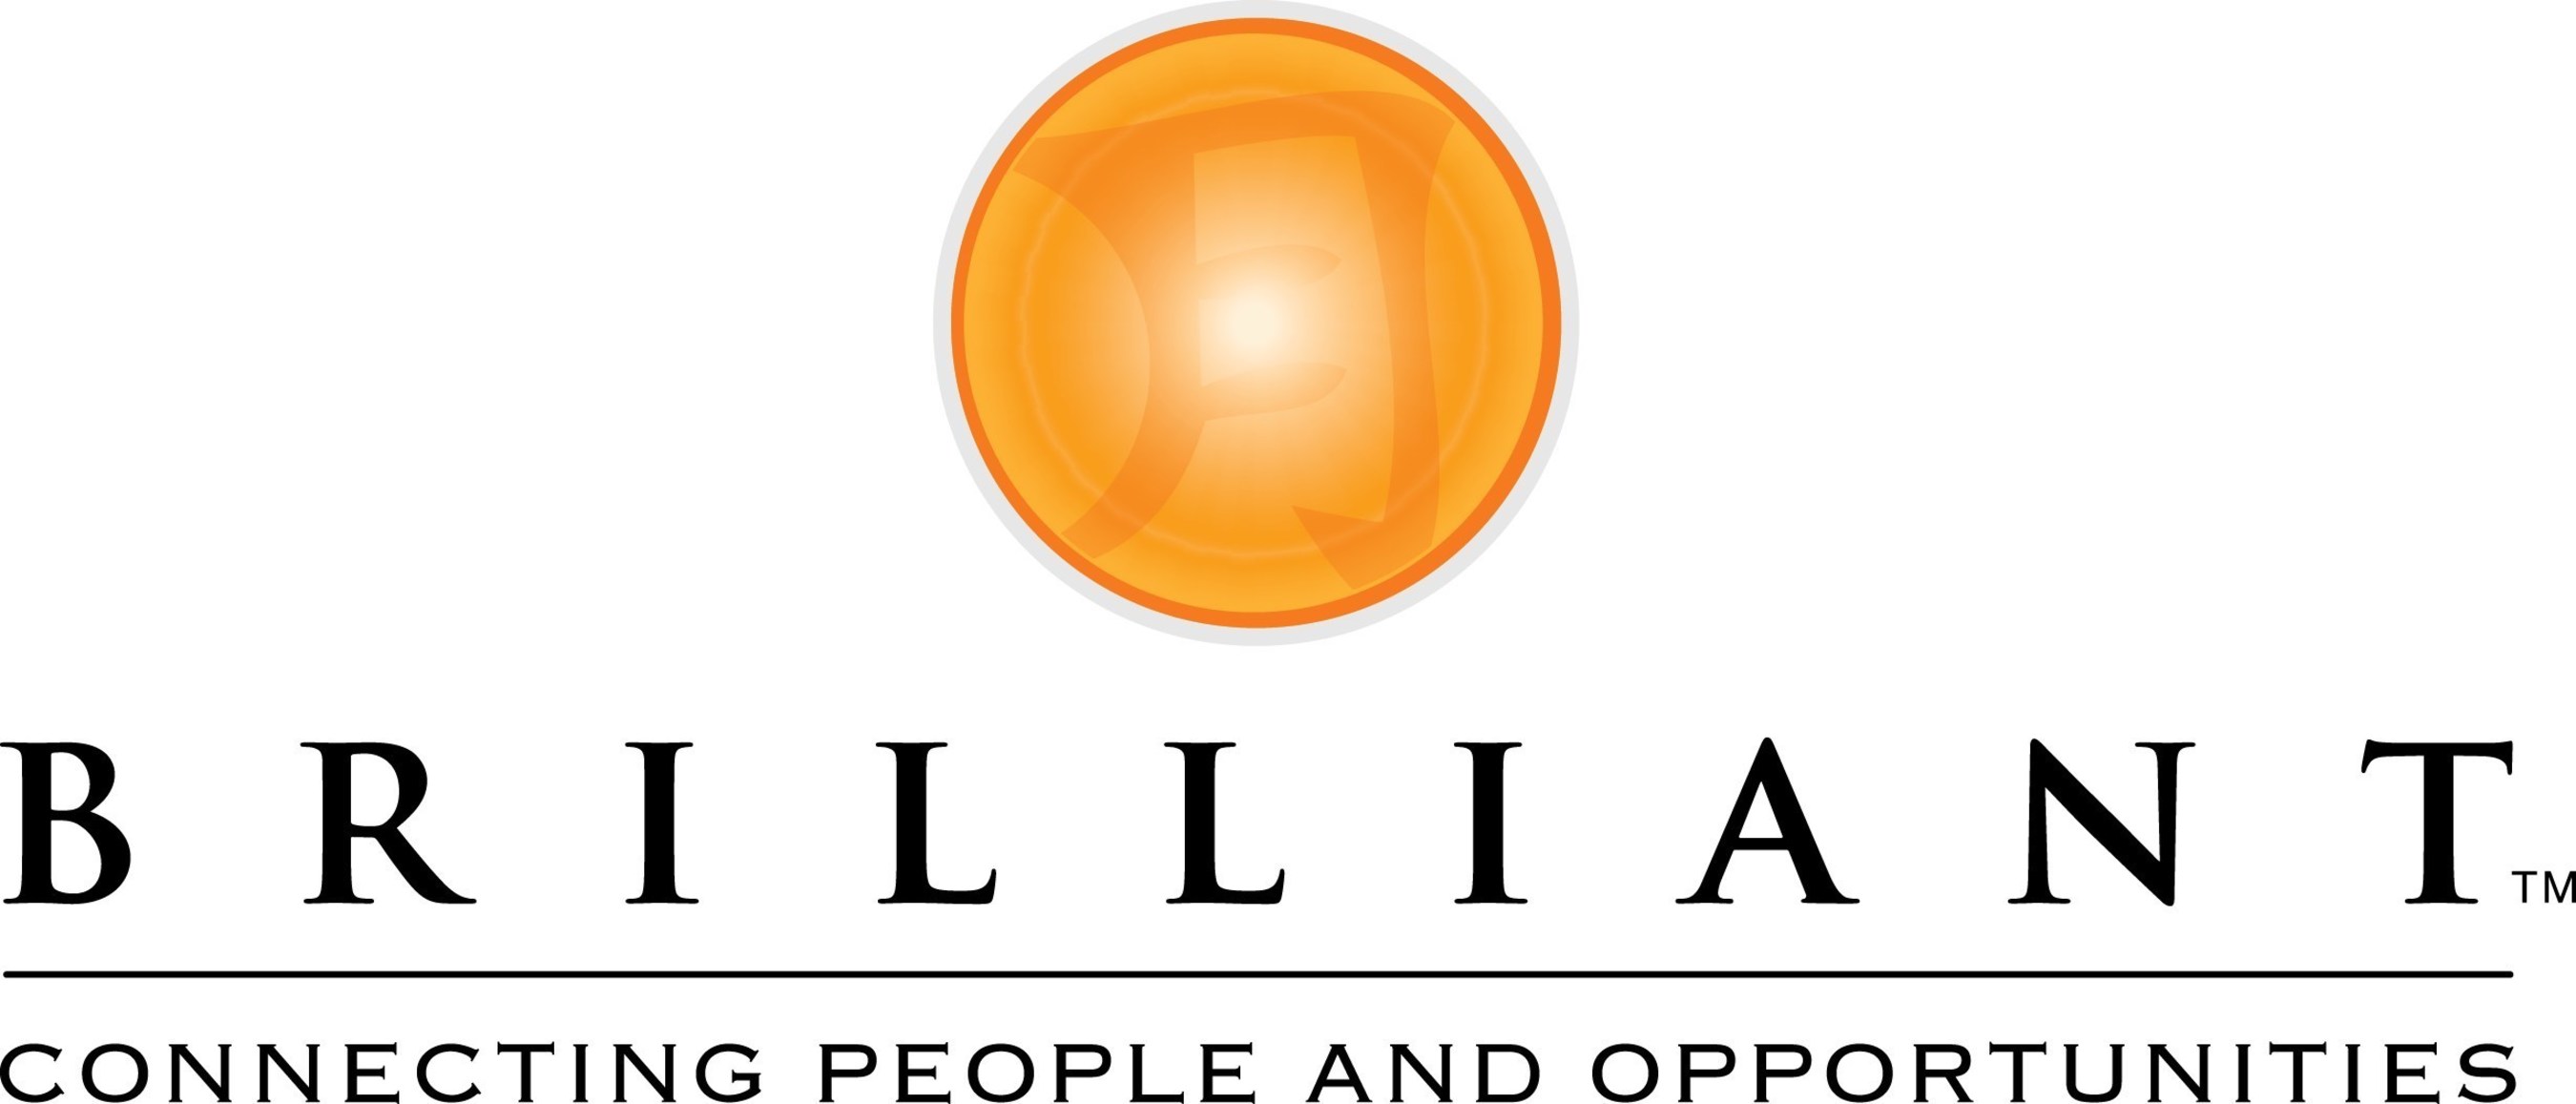 Brilliant(TM) is a search, staffing & management resources firm specializing in the accounting, finance & IT professions throughout the greater Chicago & south Florida markets. To learn more, visit www.brilliantfs.com, call 312.582.1800 or search @BrilliantFS on social media.